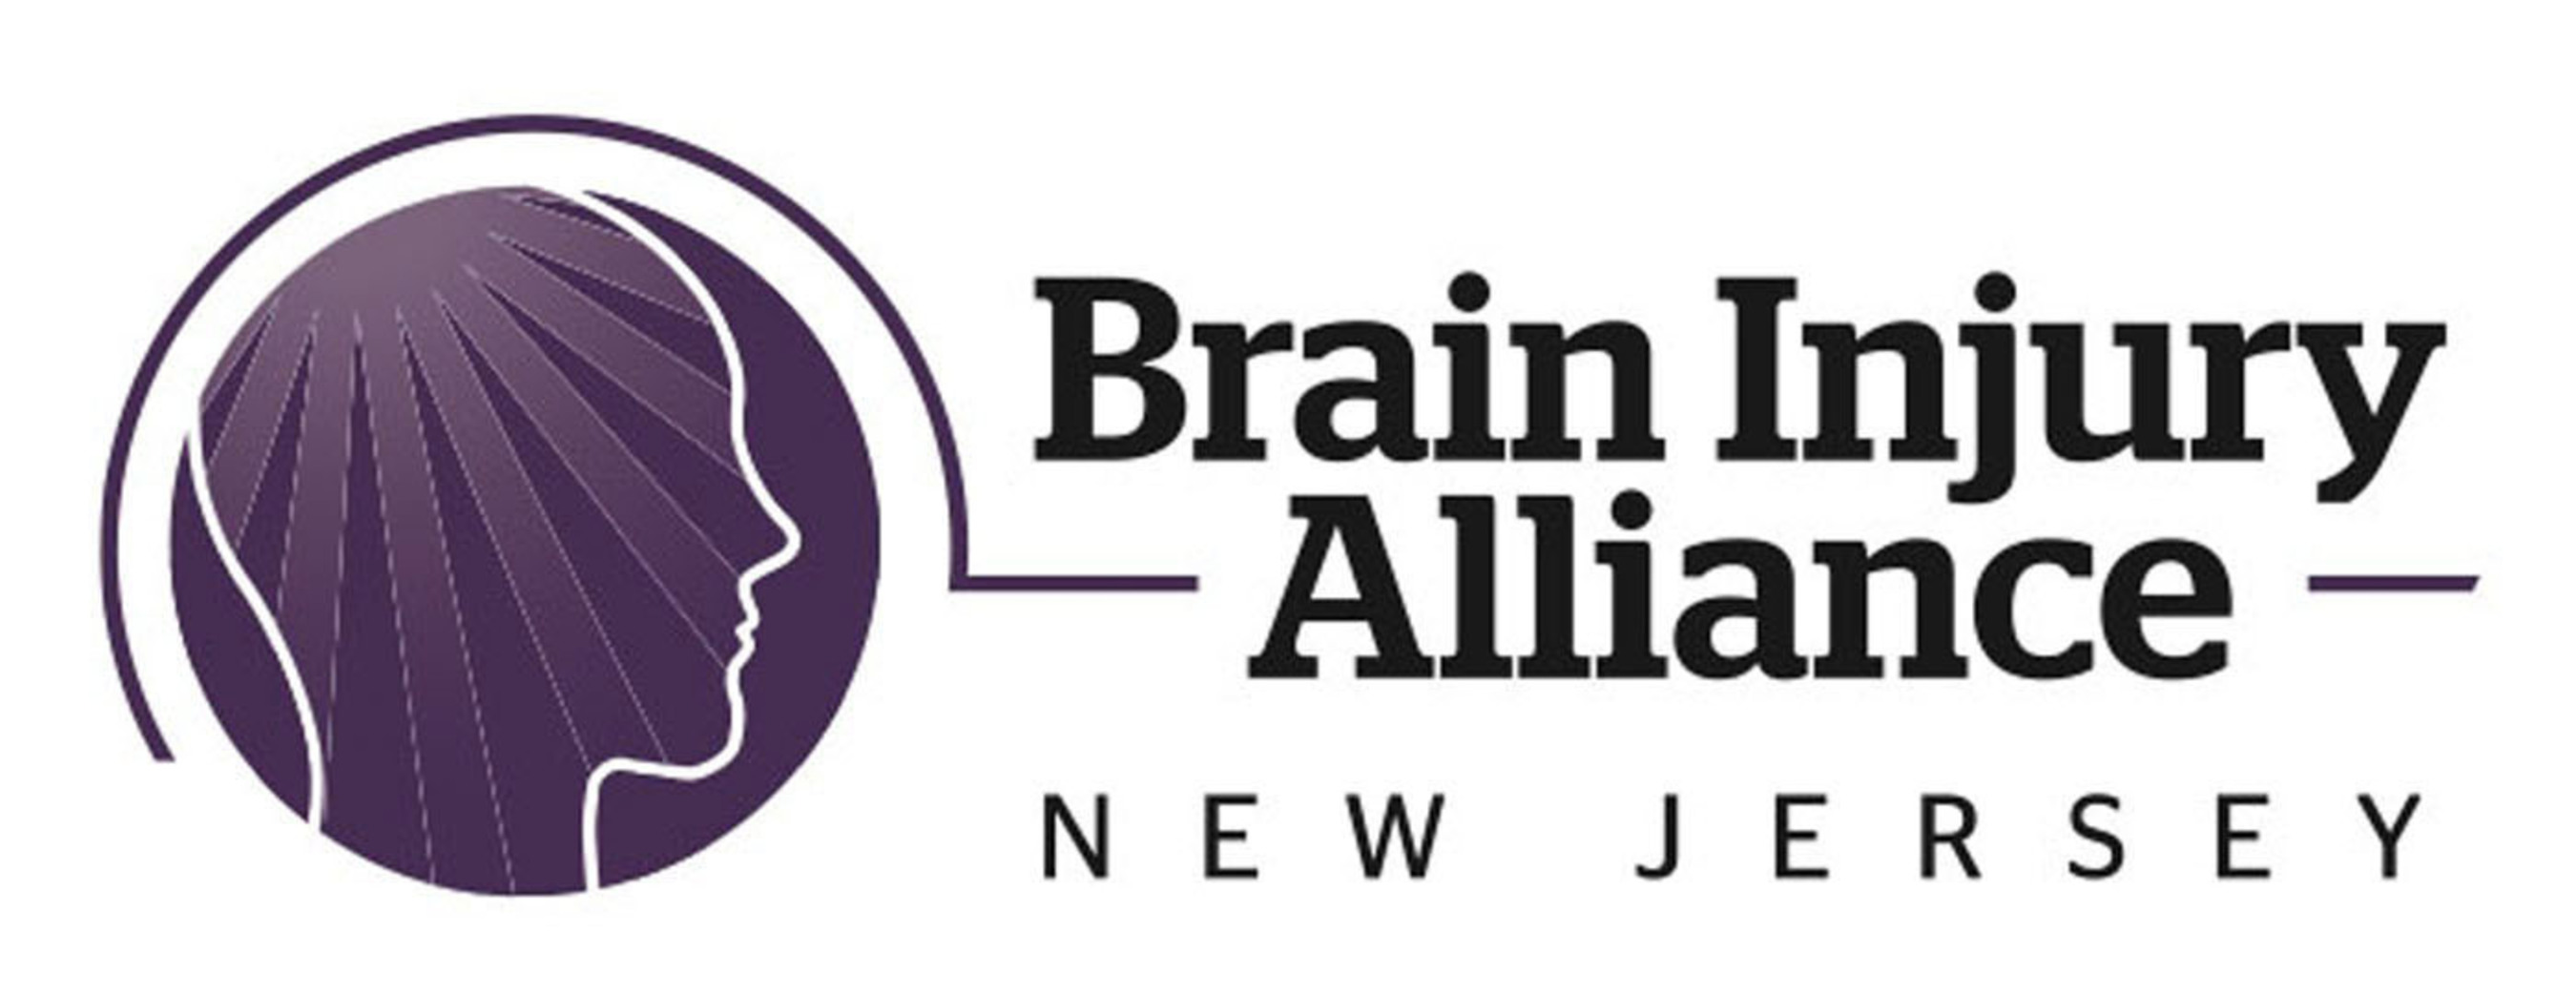 The Voice of Brain Injury in New Jersey Since 1981. (PRNewsFoto/Brain Injury Alliance of New Jersey) (PRNewsFoto/BRAIN INJURY ALLIANCE OF NJ)